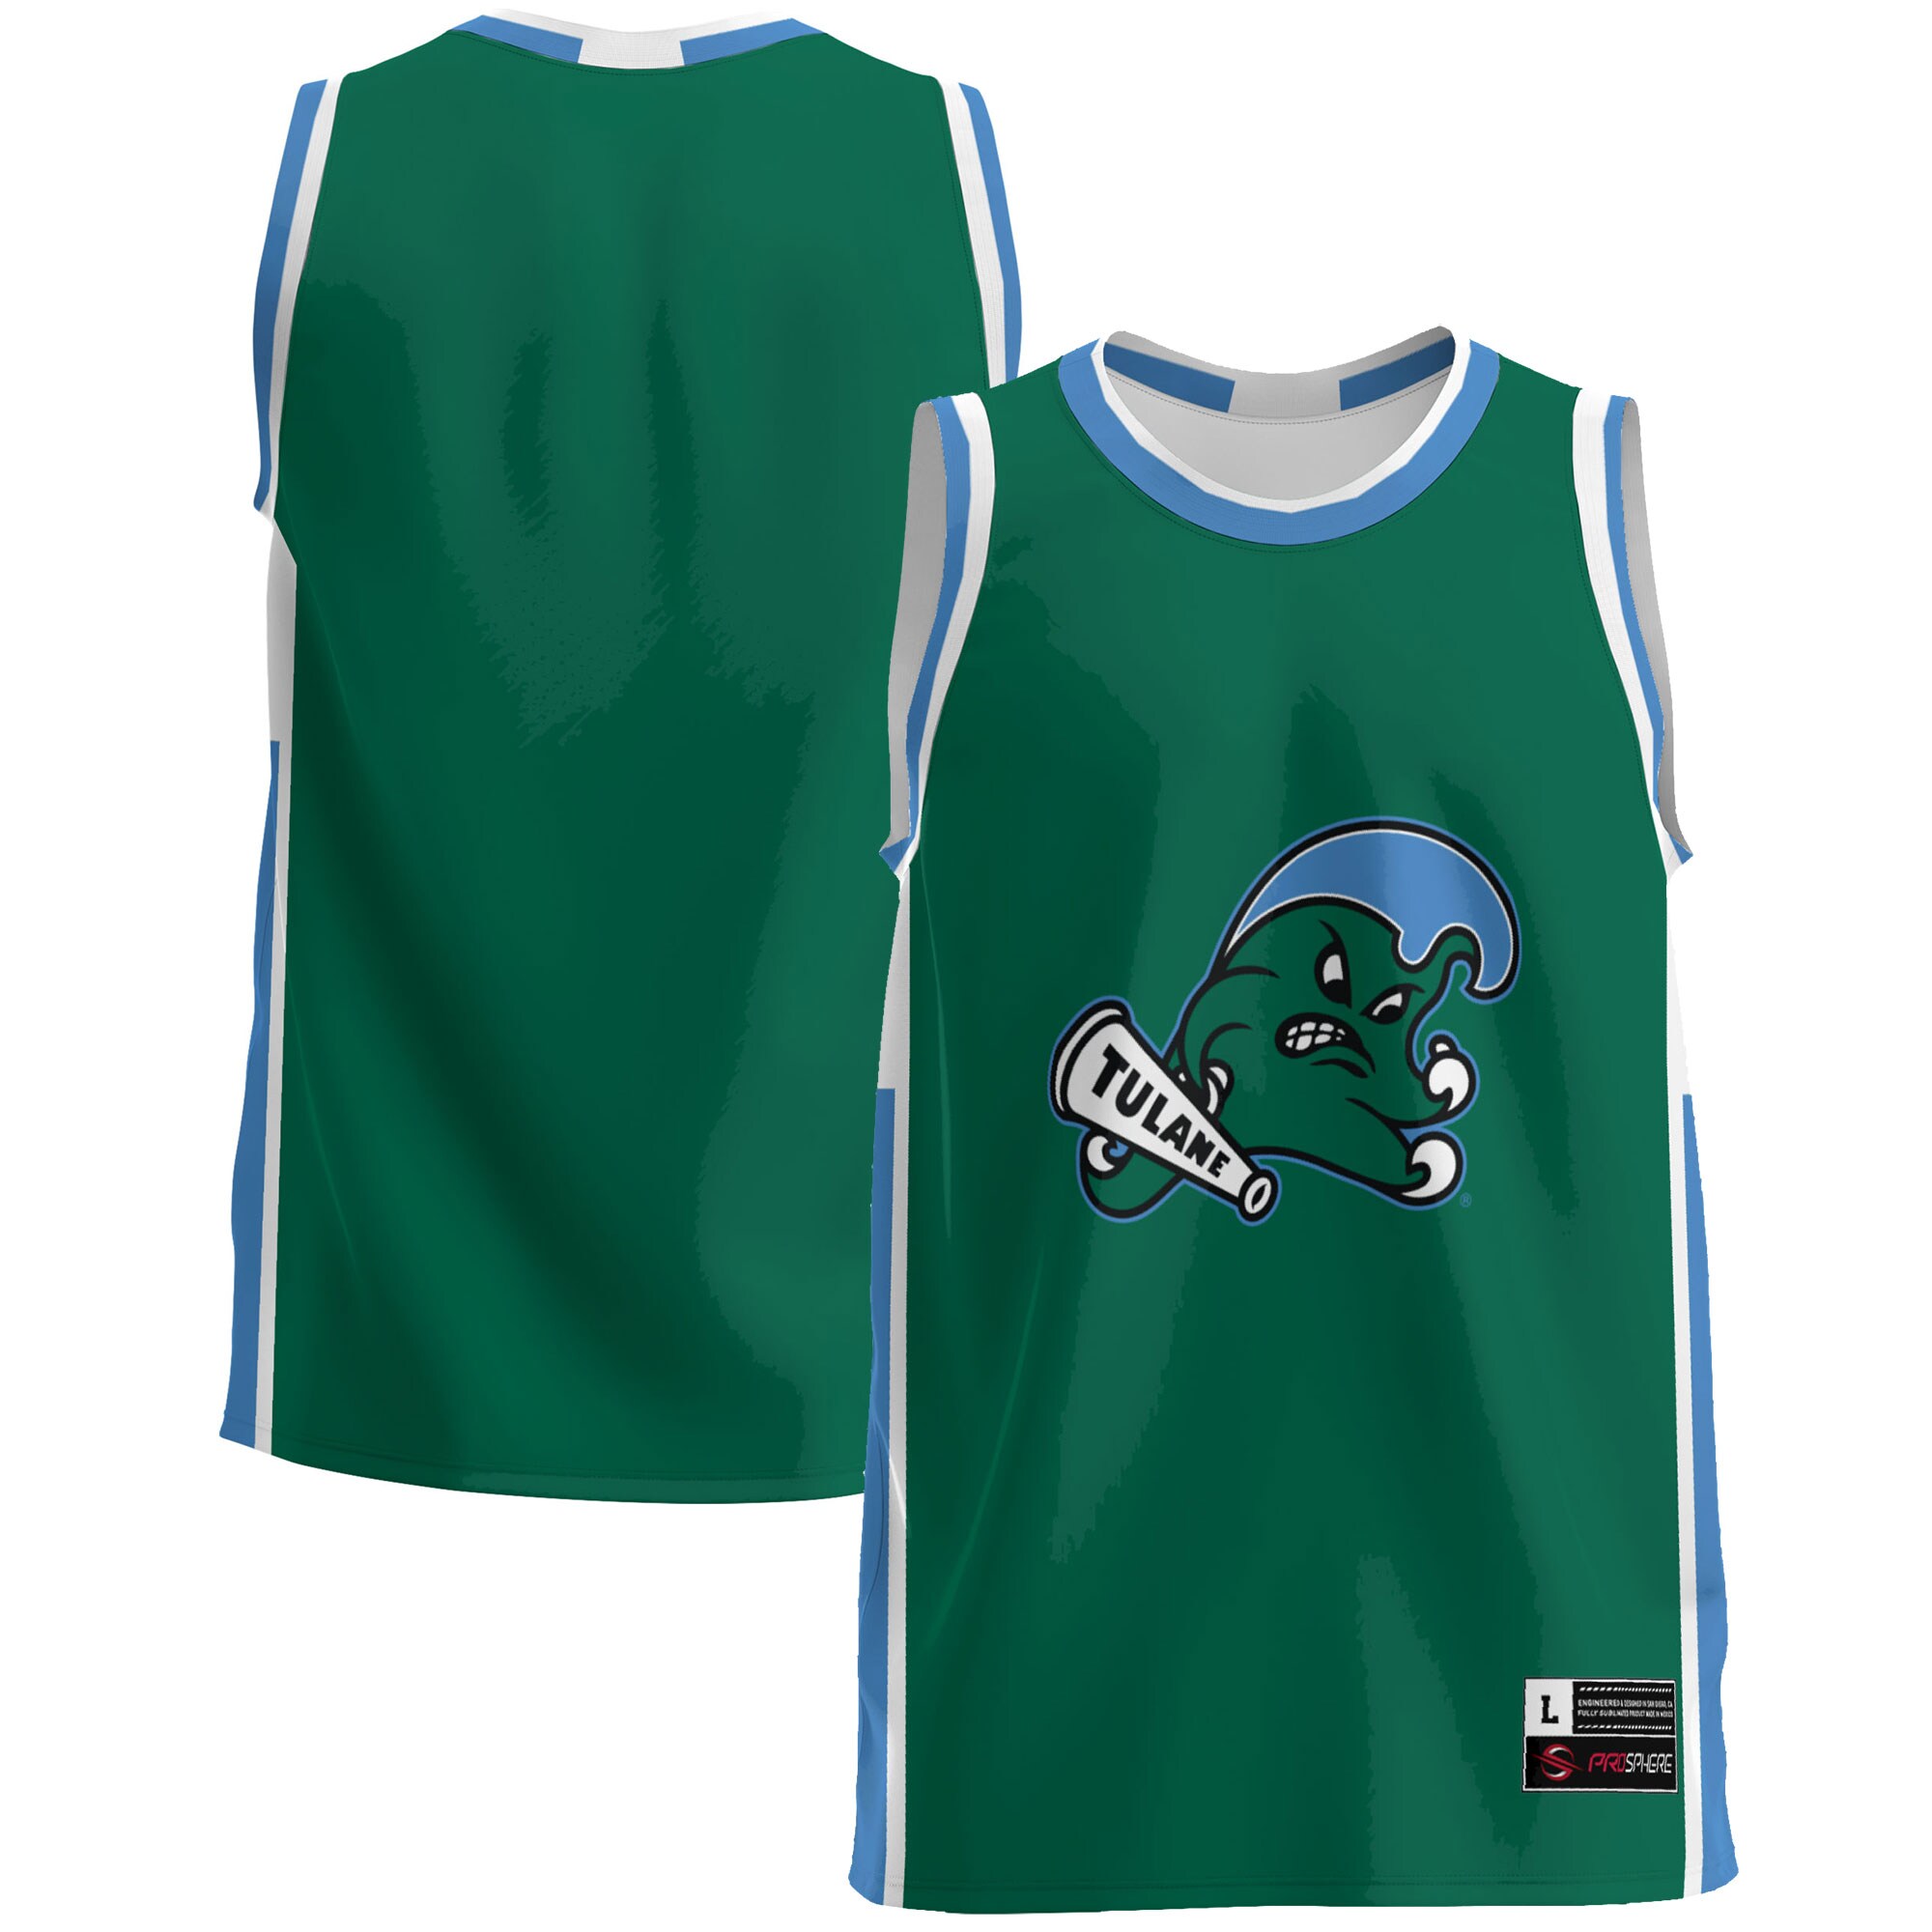 Tulane Green Wave Basketball Jersey - Green For Youth Women Men